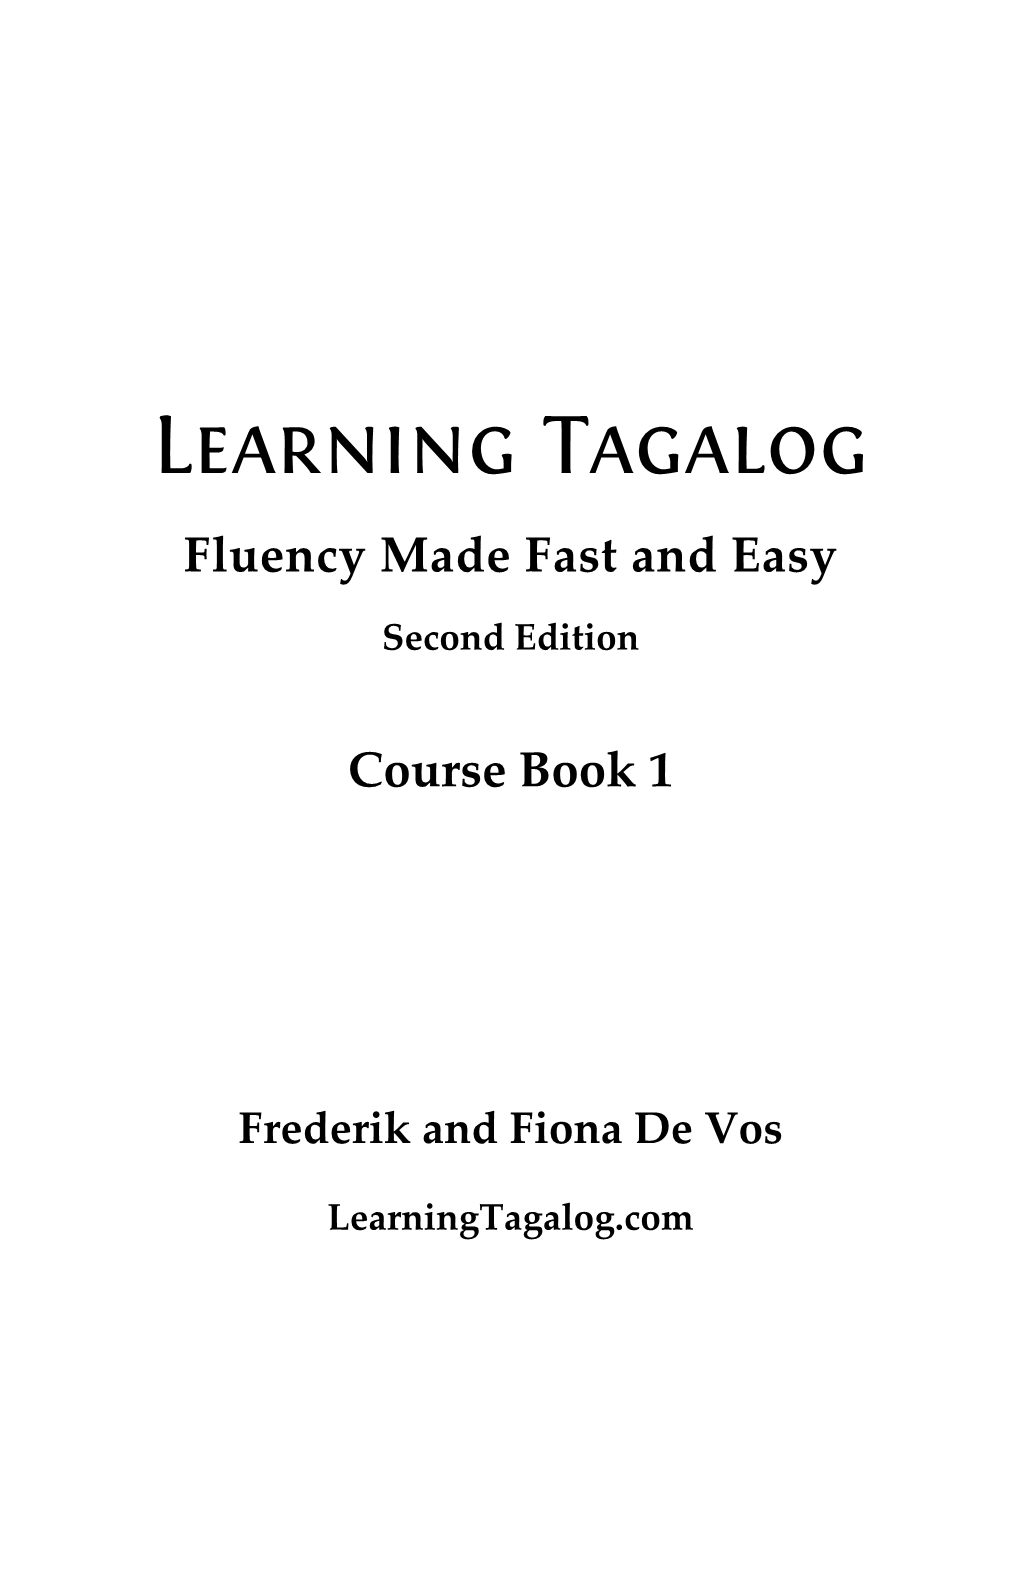 Fluency Made Fast and Easy, Course Book 1